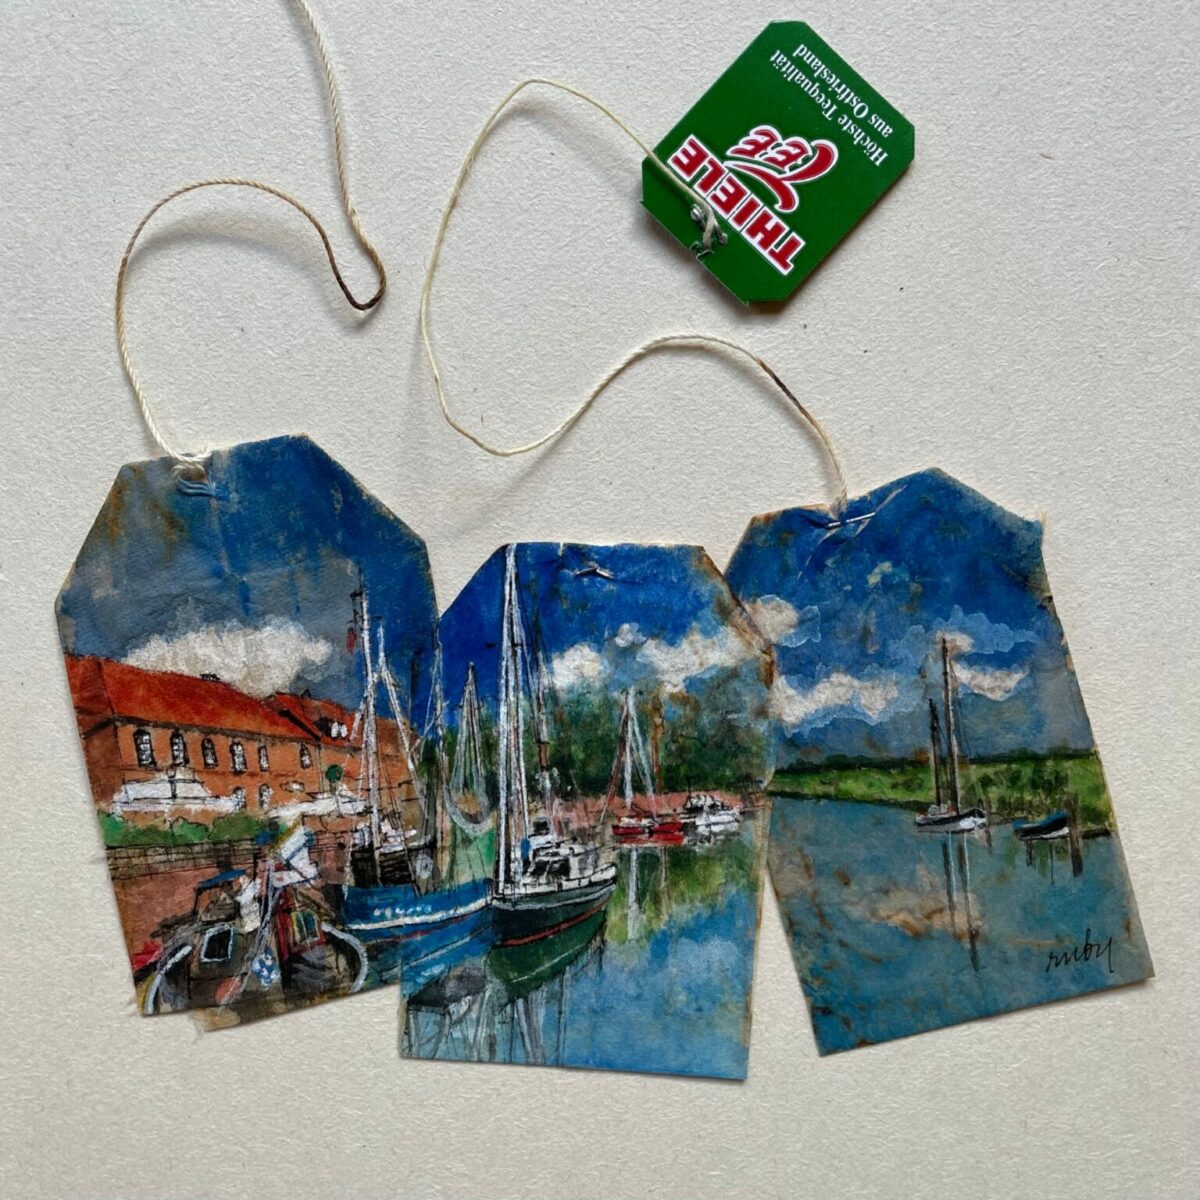 Gorgeous Miniature Watercolors Painted On Used Teabags By Ruby Silvious 15